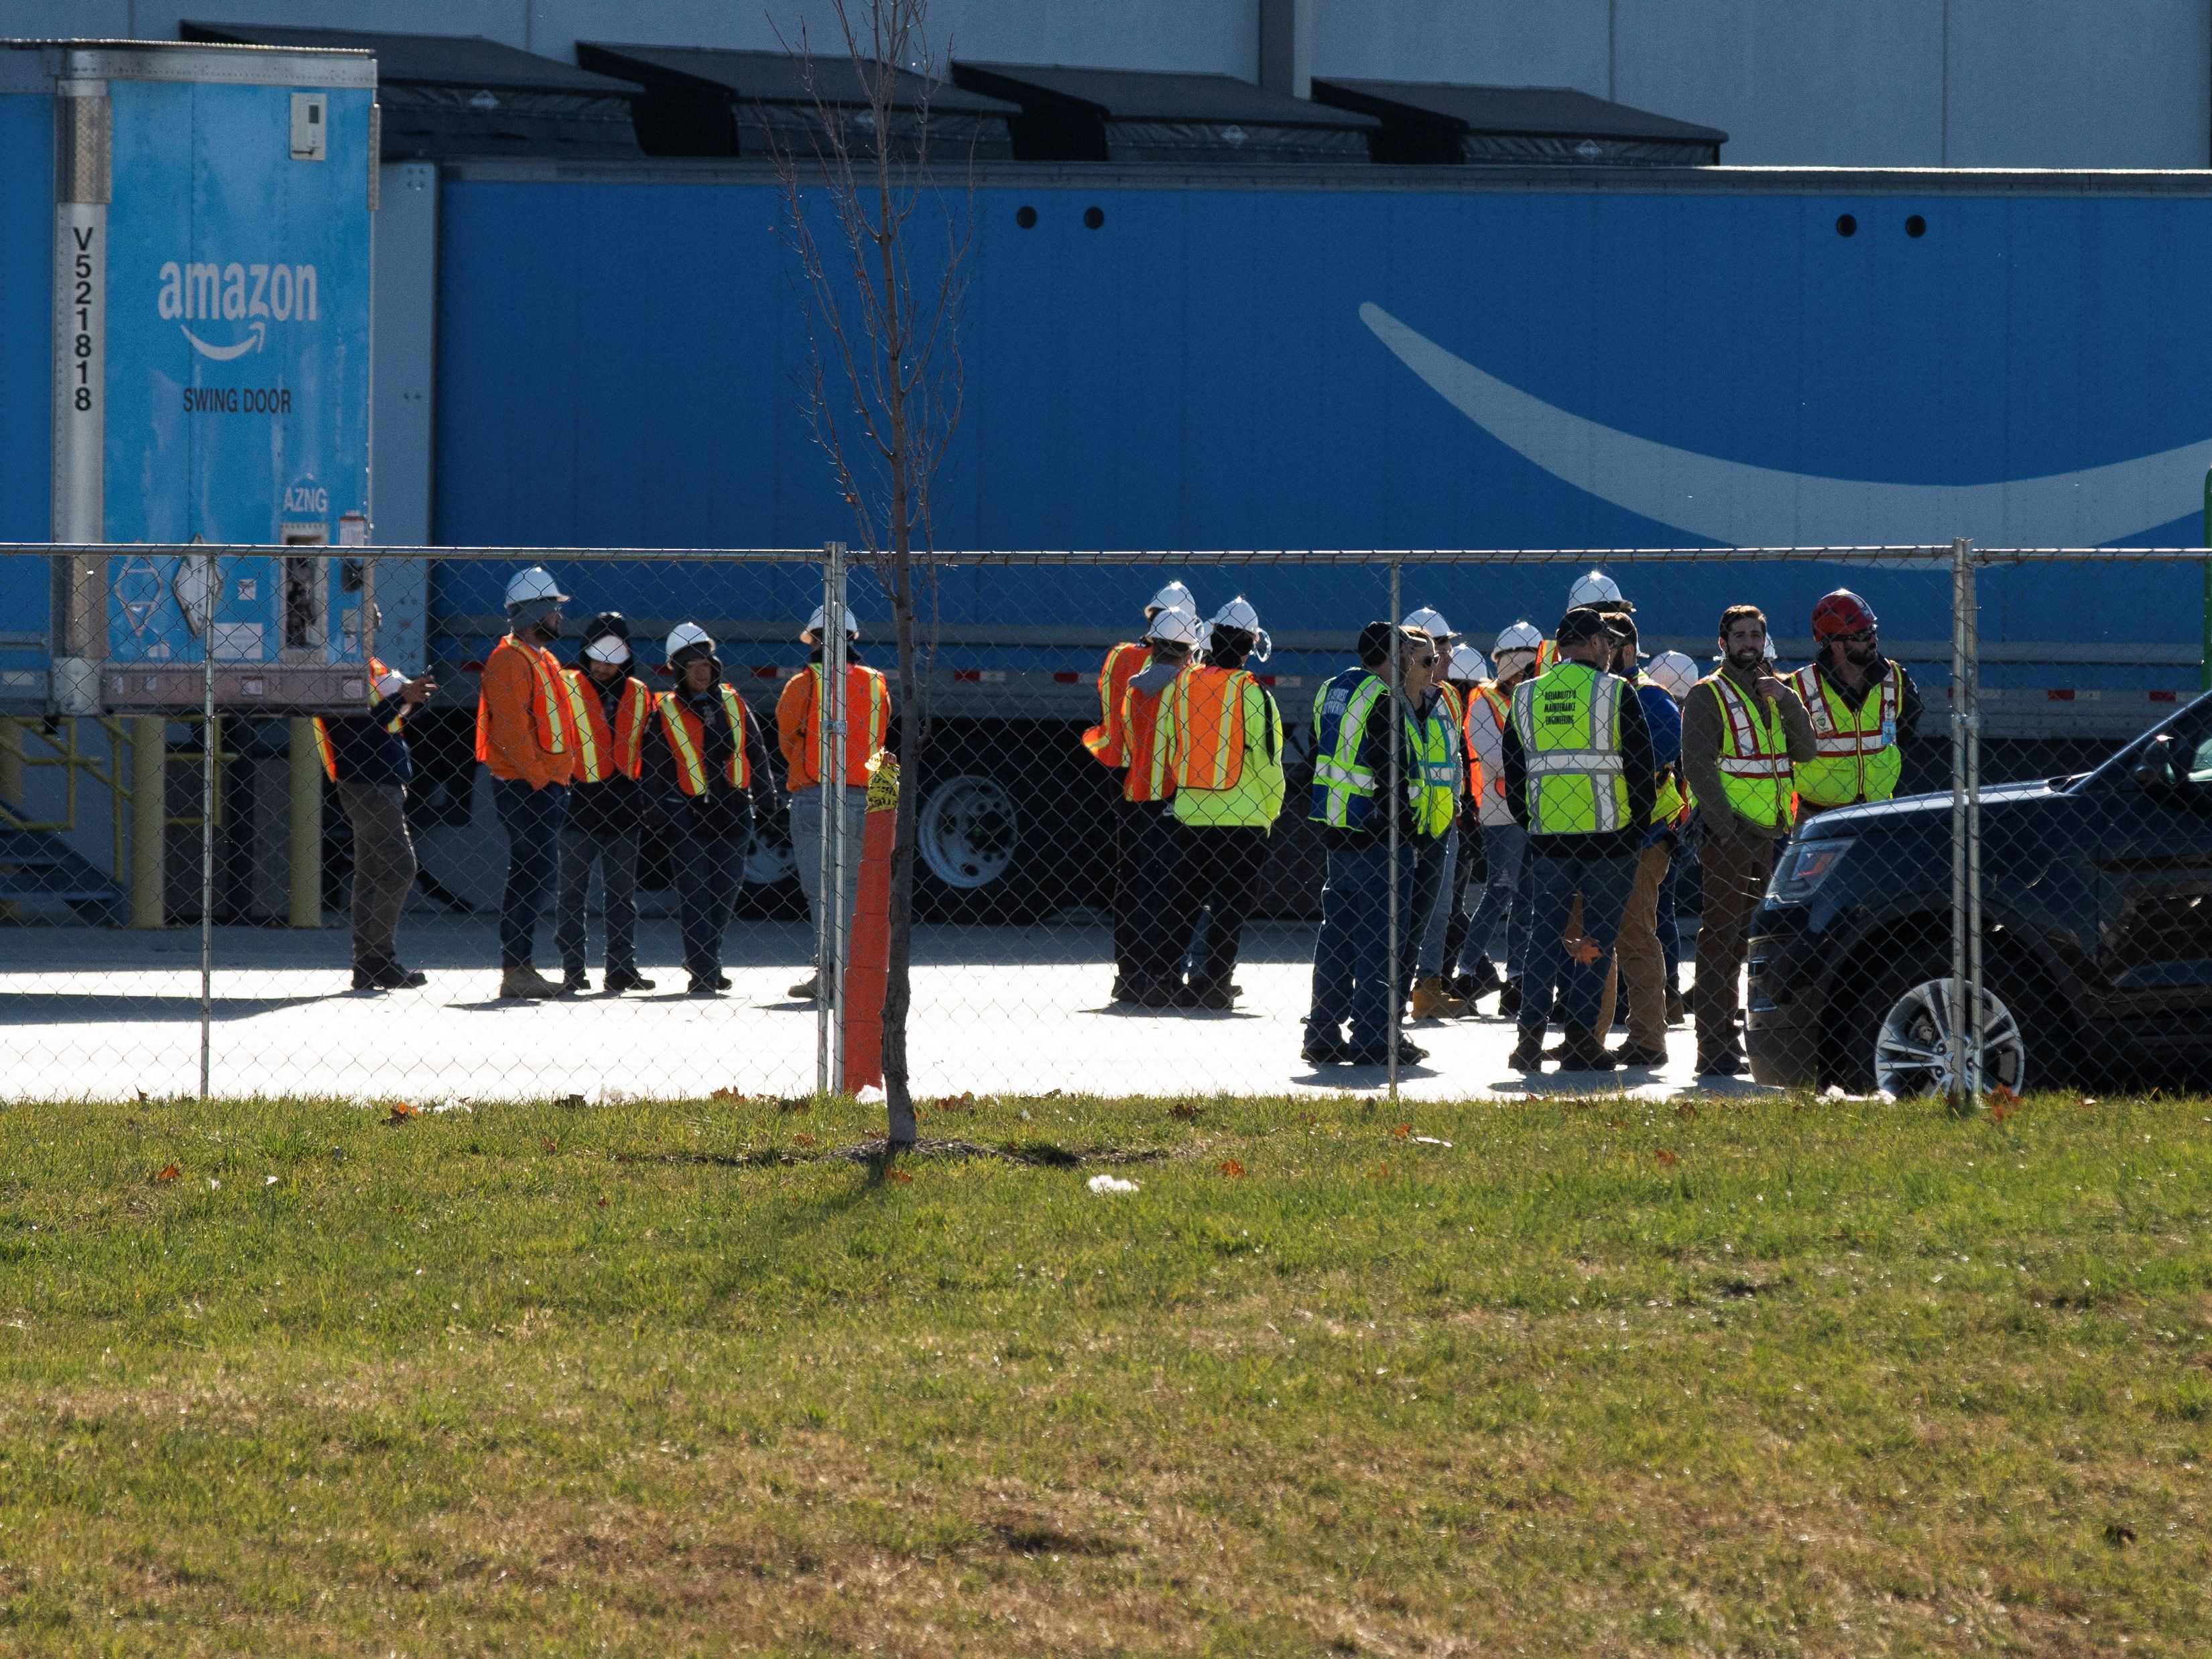 Emergency vehicles surround the site of a roof collapse at an Amazon distribution center in Edwardsville